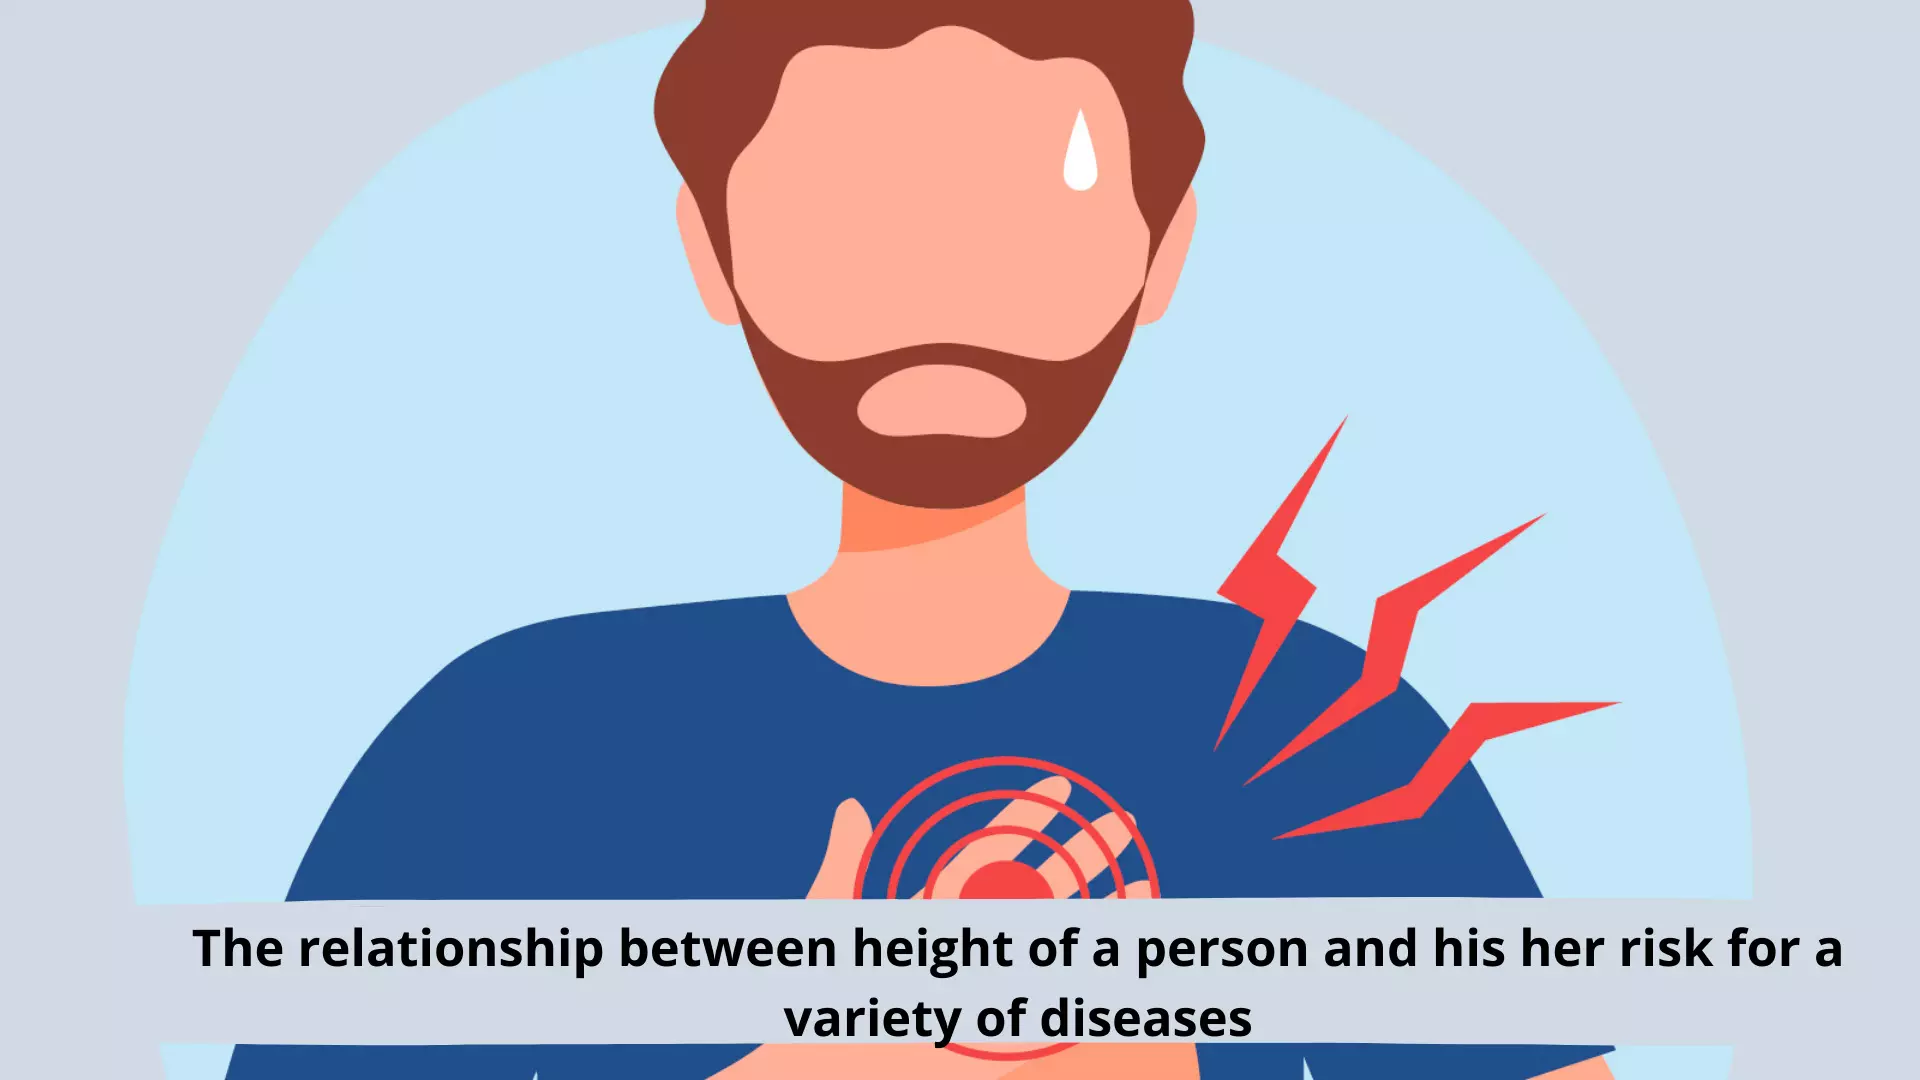 The relationship between height of a person and his her risk for a variety of diseases